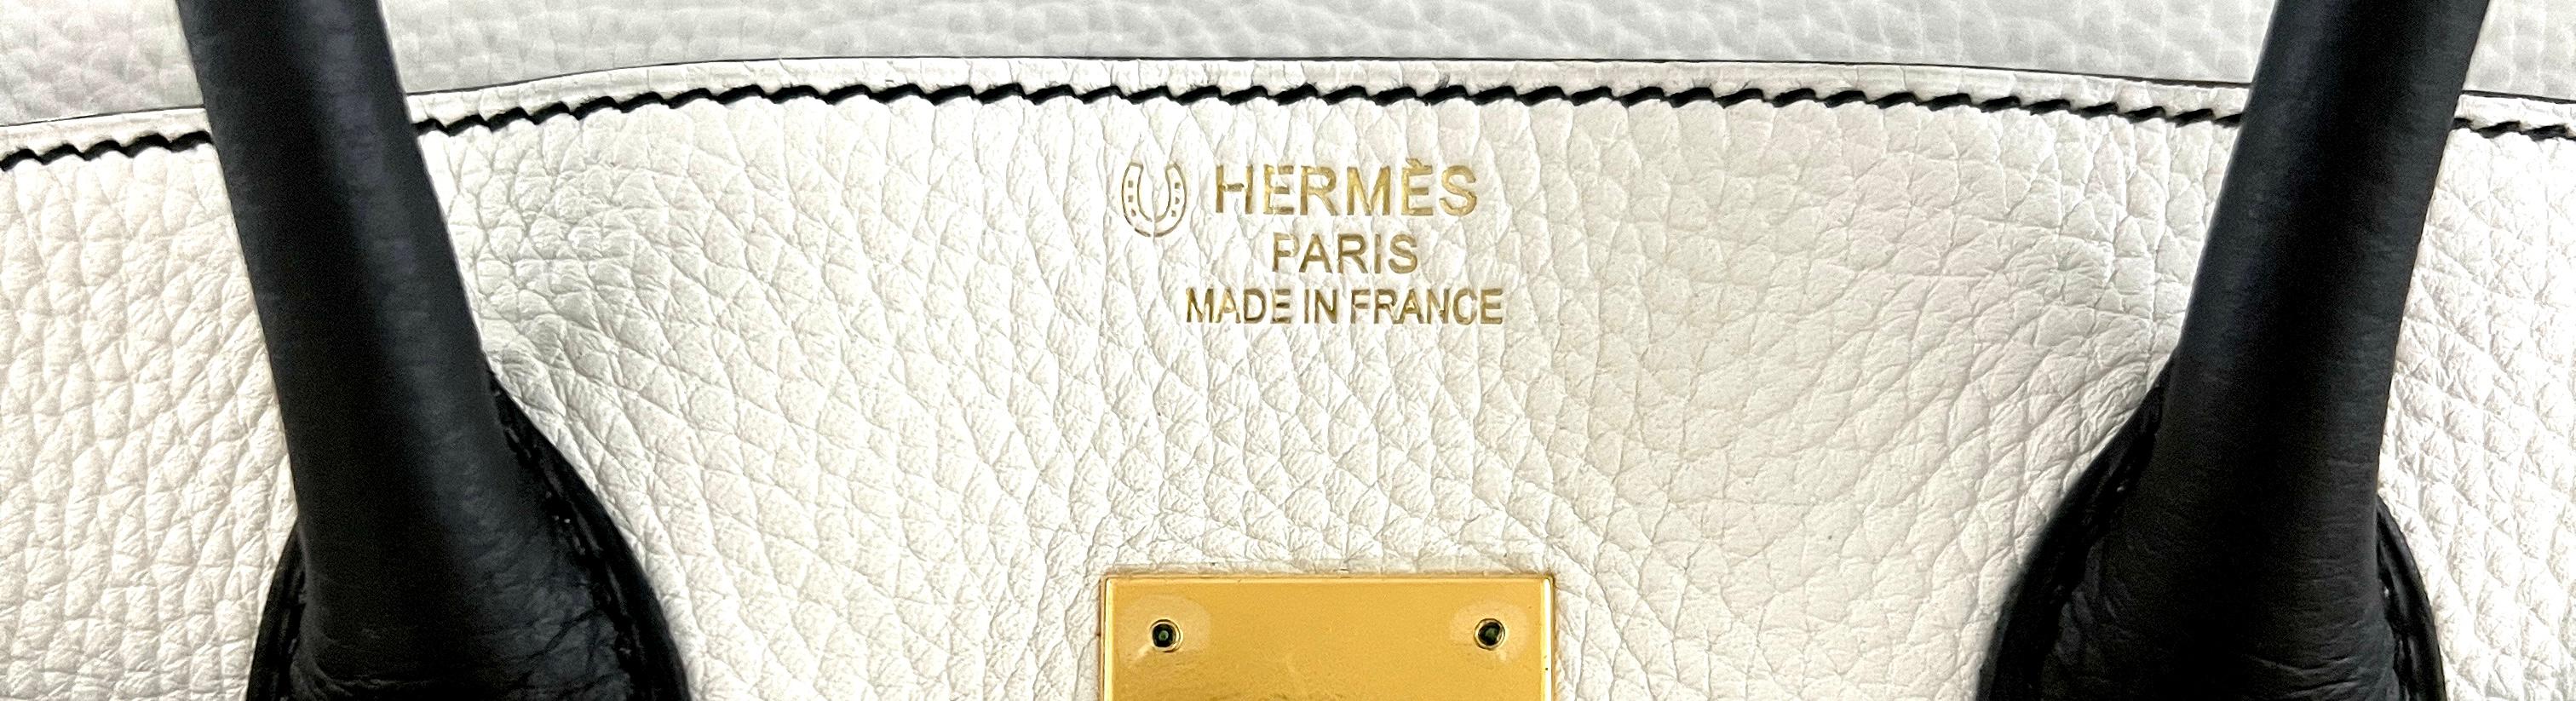 Hermes Birkin 35 Special Order PANDA White Black Noir Togo Leather Gold Hardware In Excellent Condition For Sale In Miami, FL